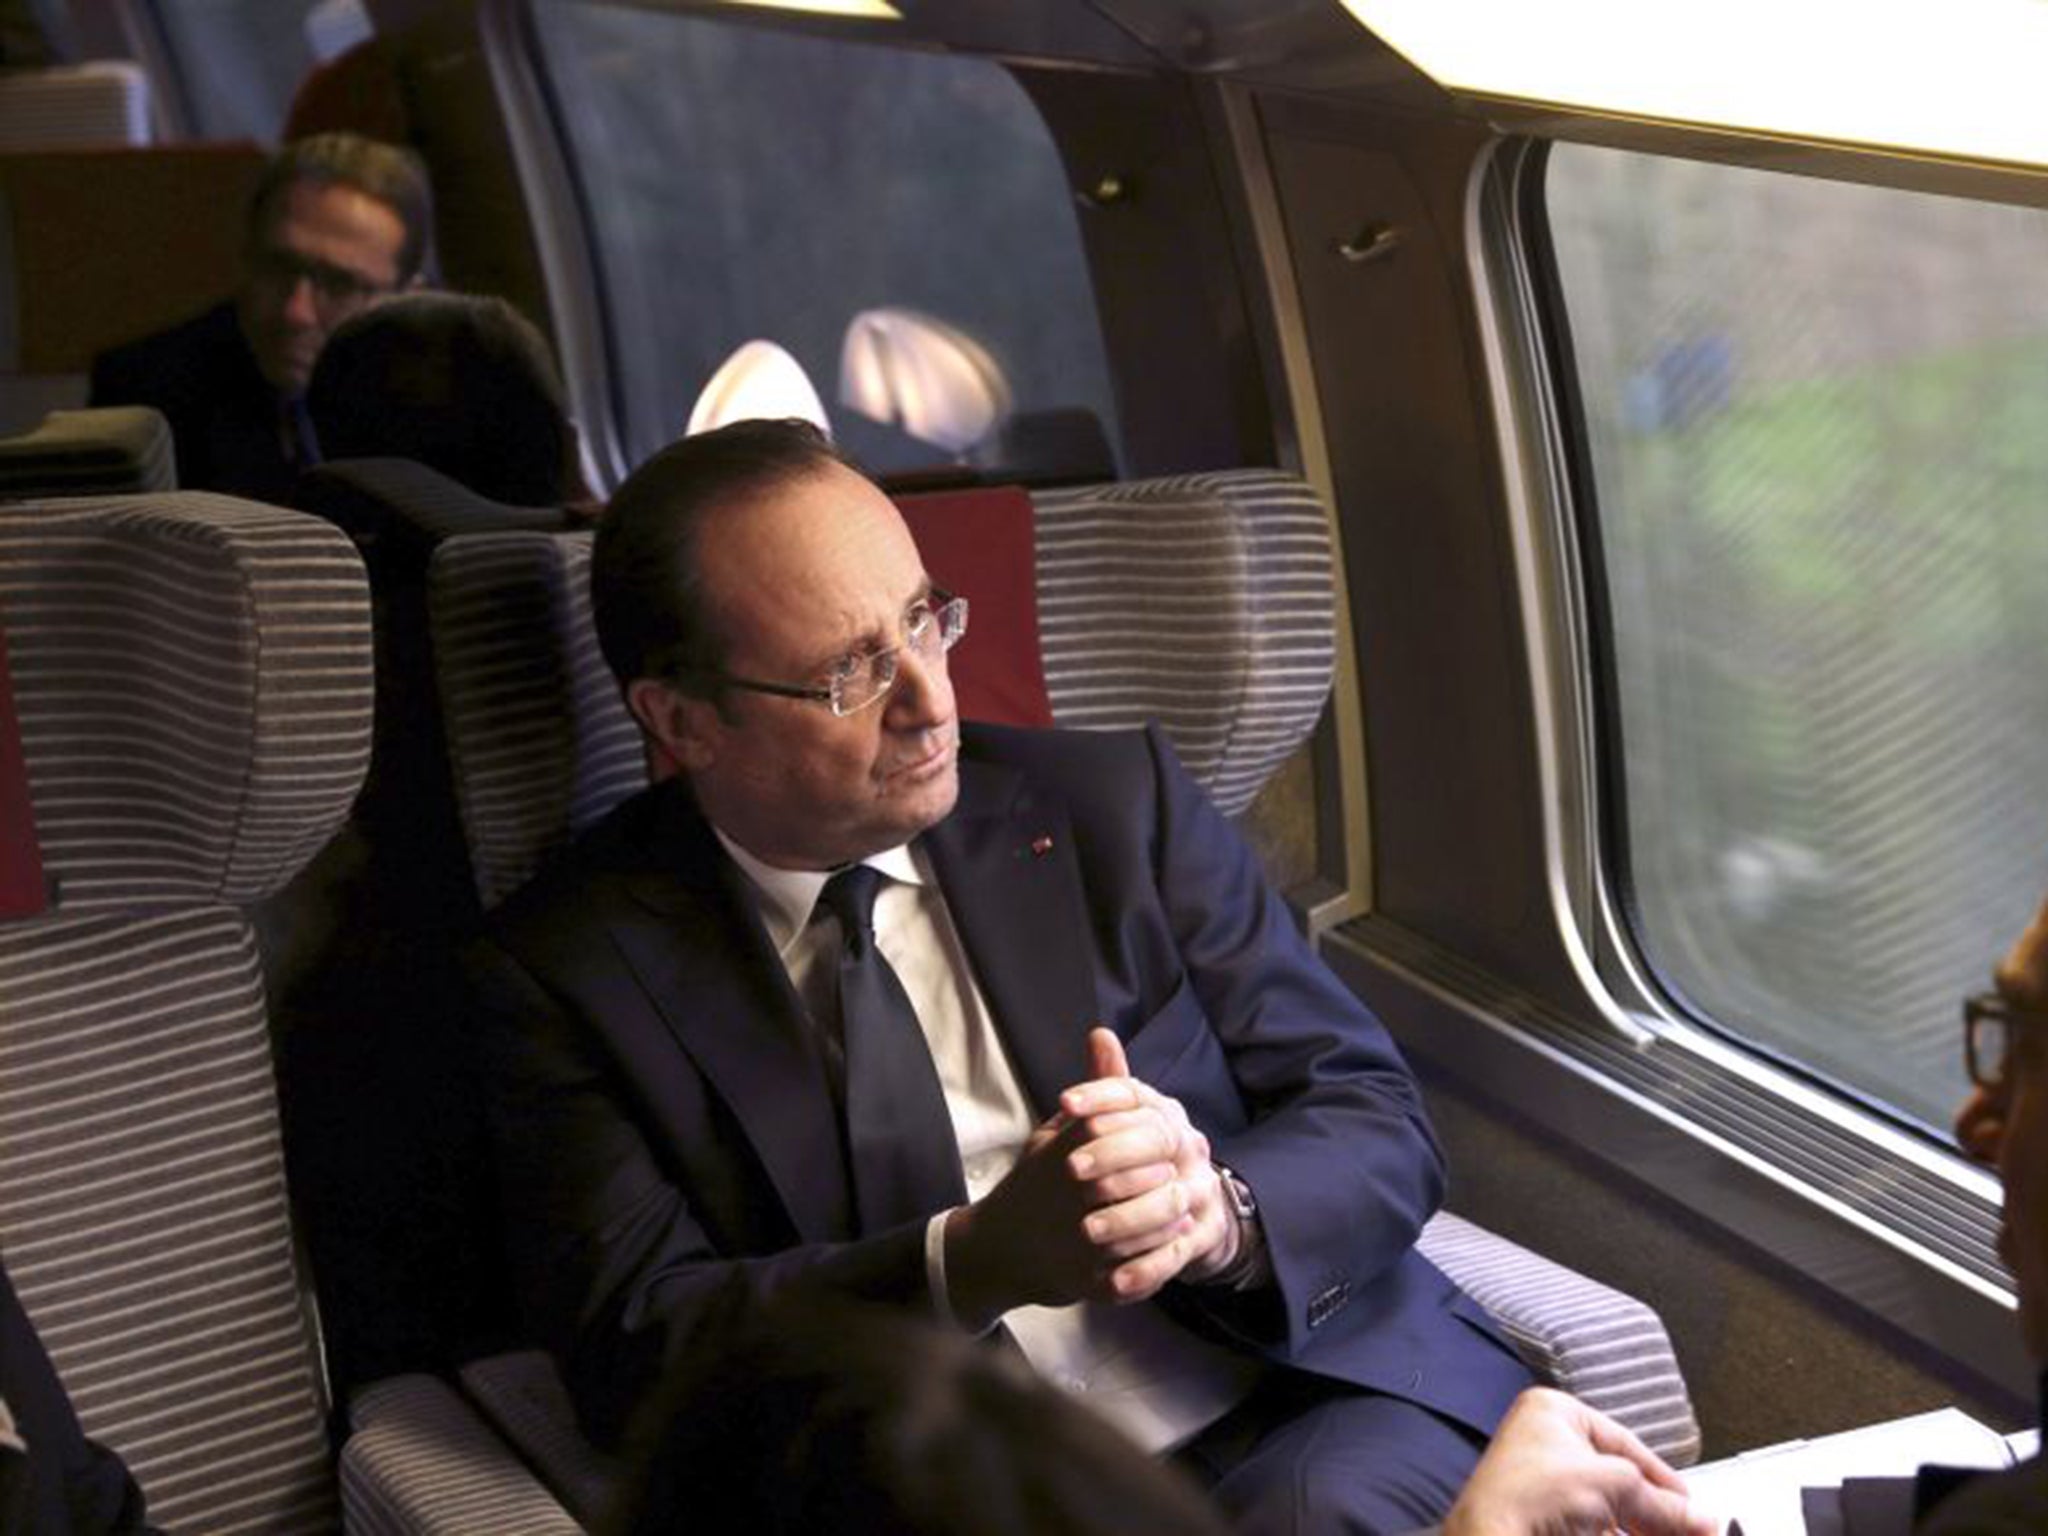 François Hollande wants to extend the TGV network to his base in the south-west